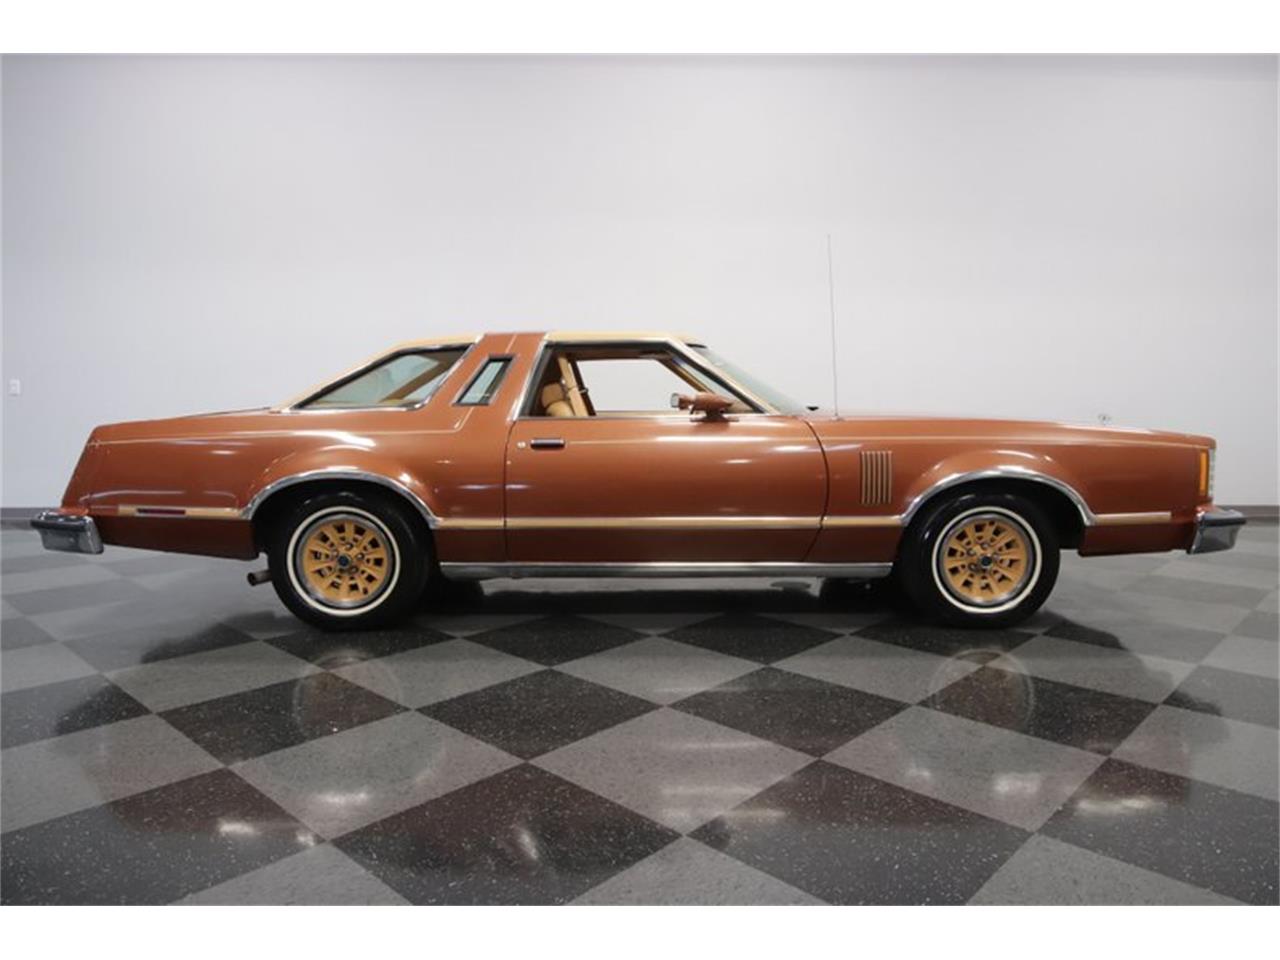 79 t bird for sale